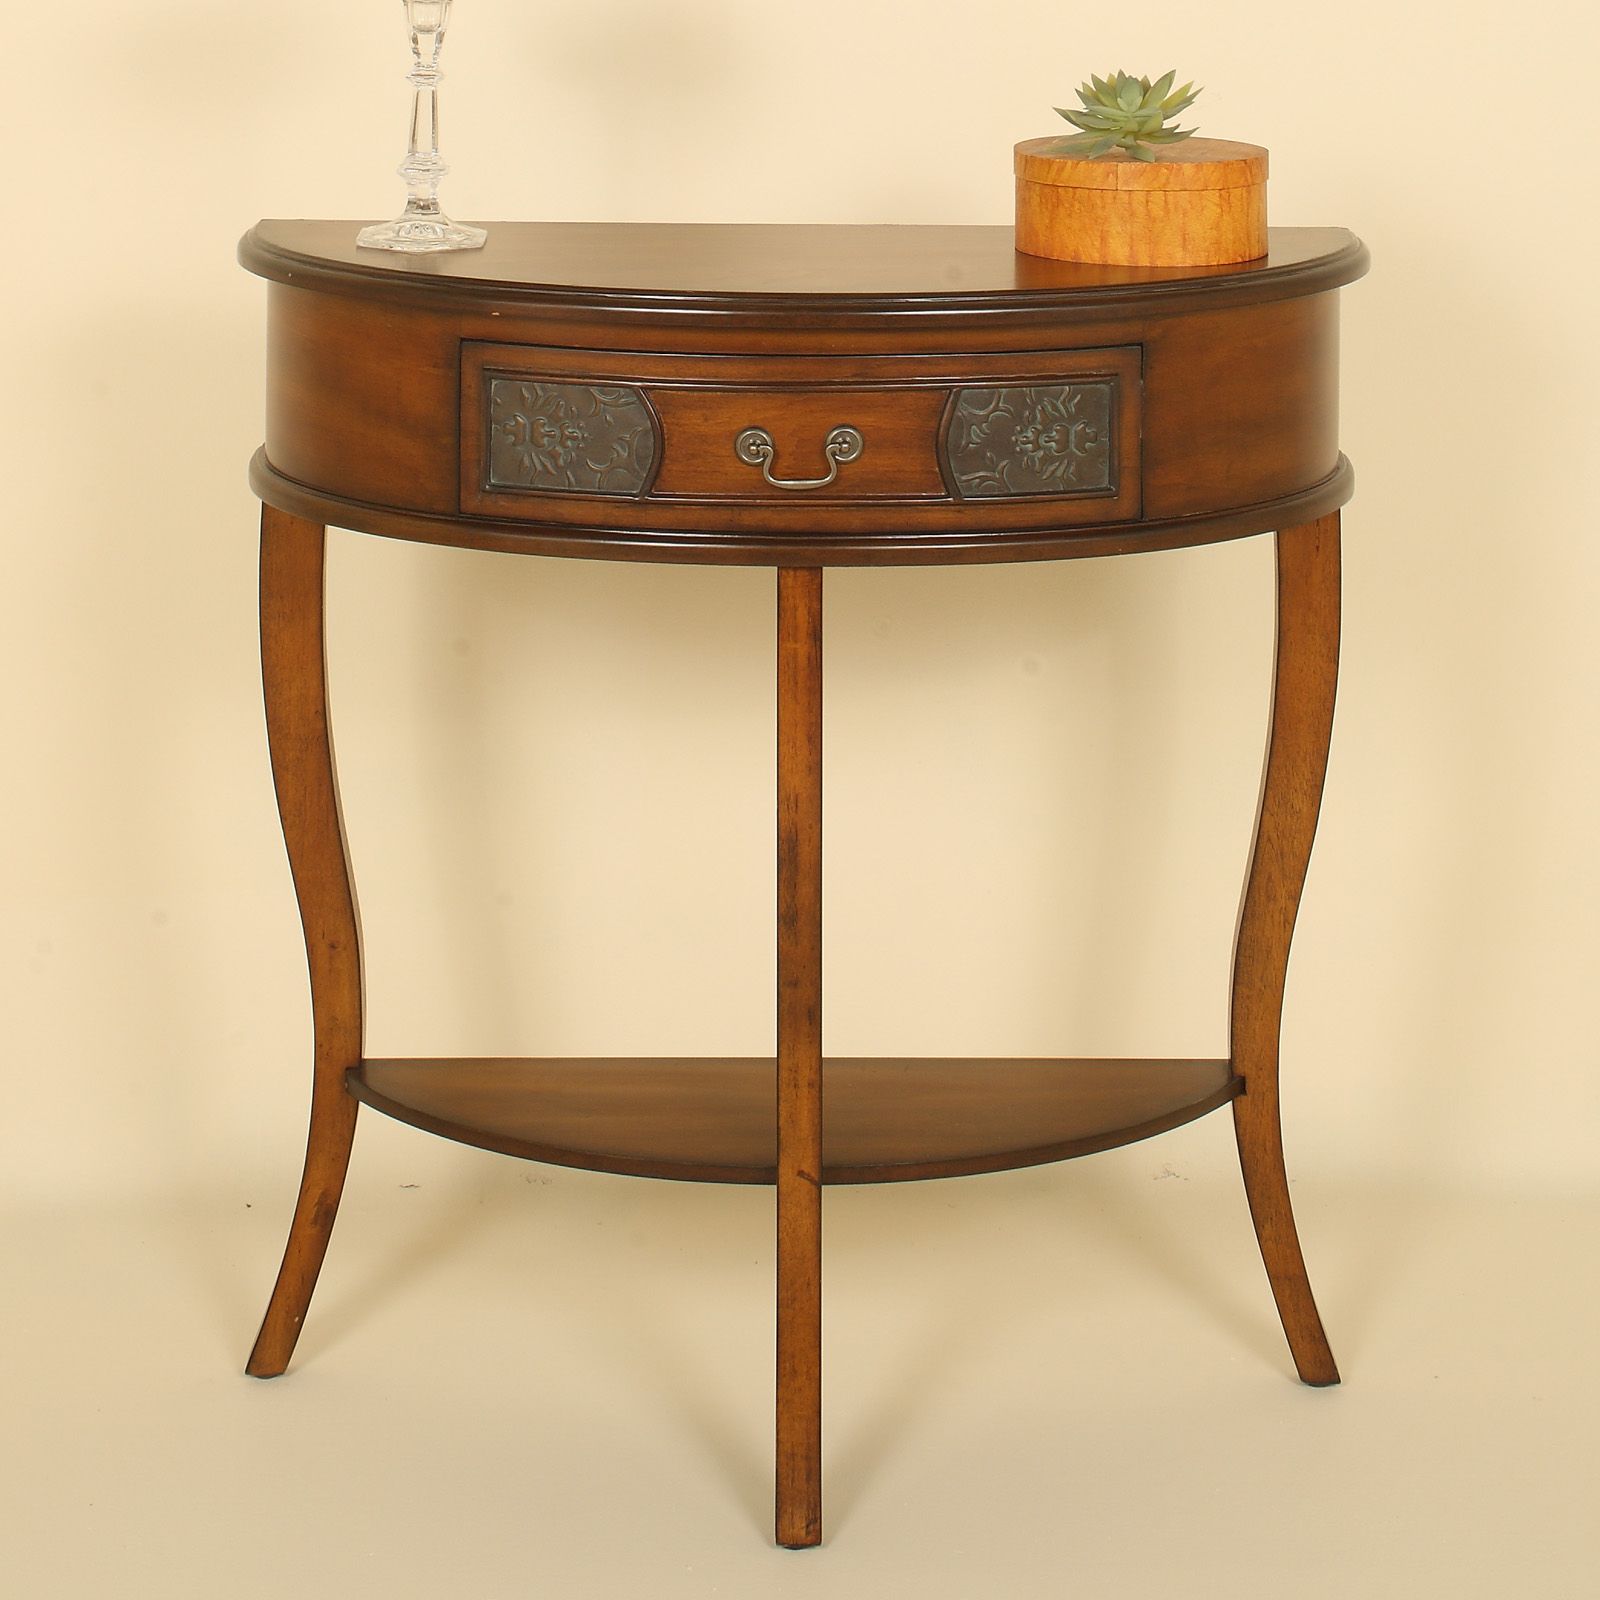 Most Current Barnside Round Console Tables With Passport Half Round Console Table – Walnut At Hayneedle (View 4 of 10)